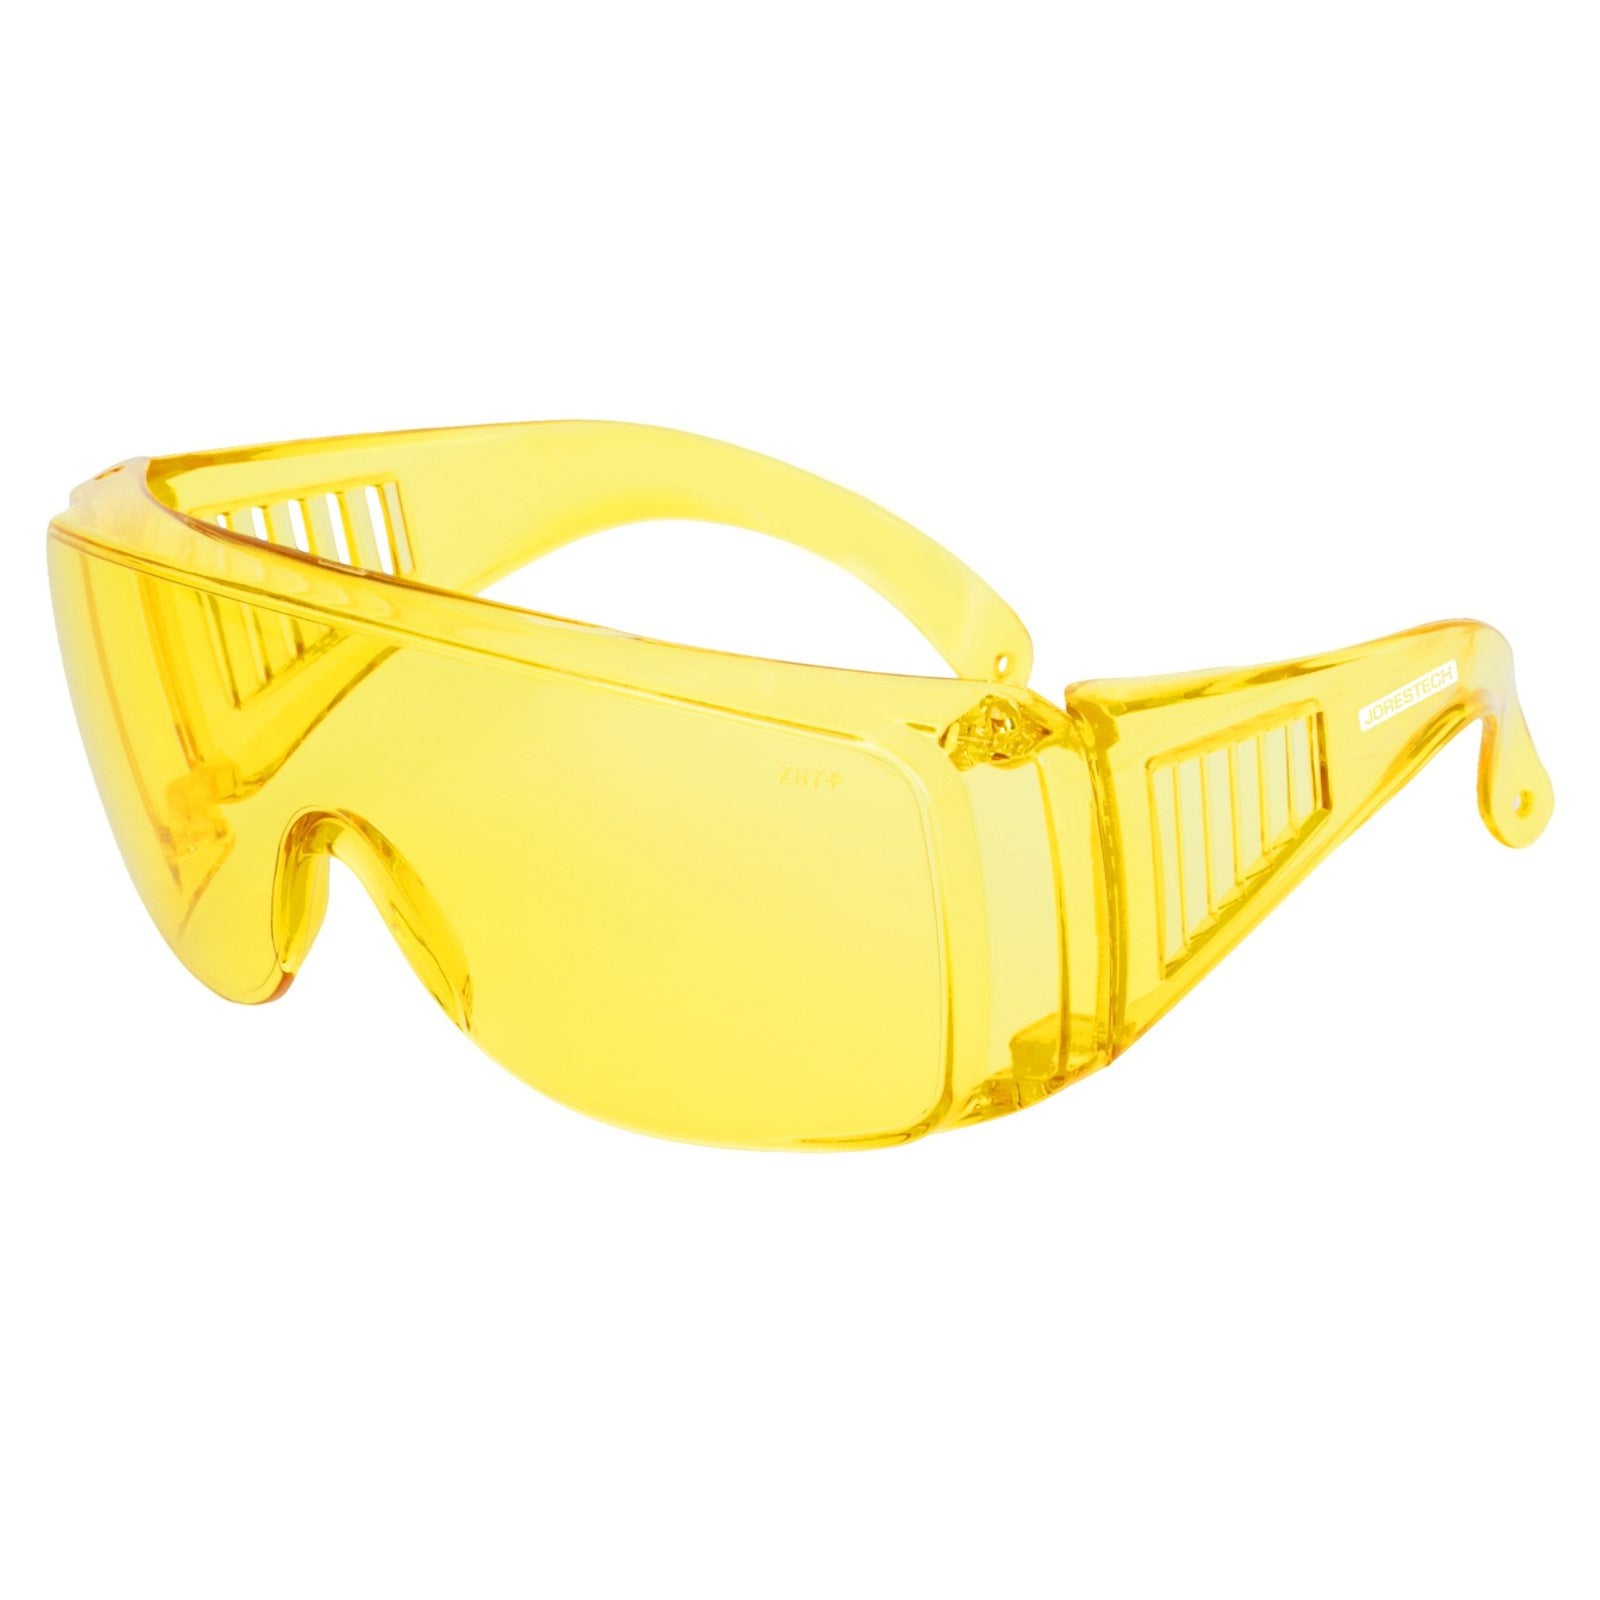 Diagonal view of the yellow Jorestech ANSI compliant safety overglasses for high impact protection on a white background